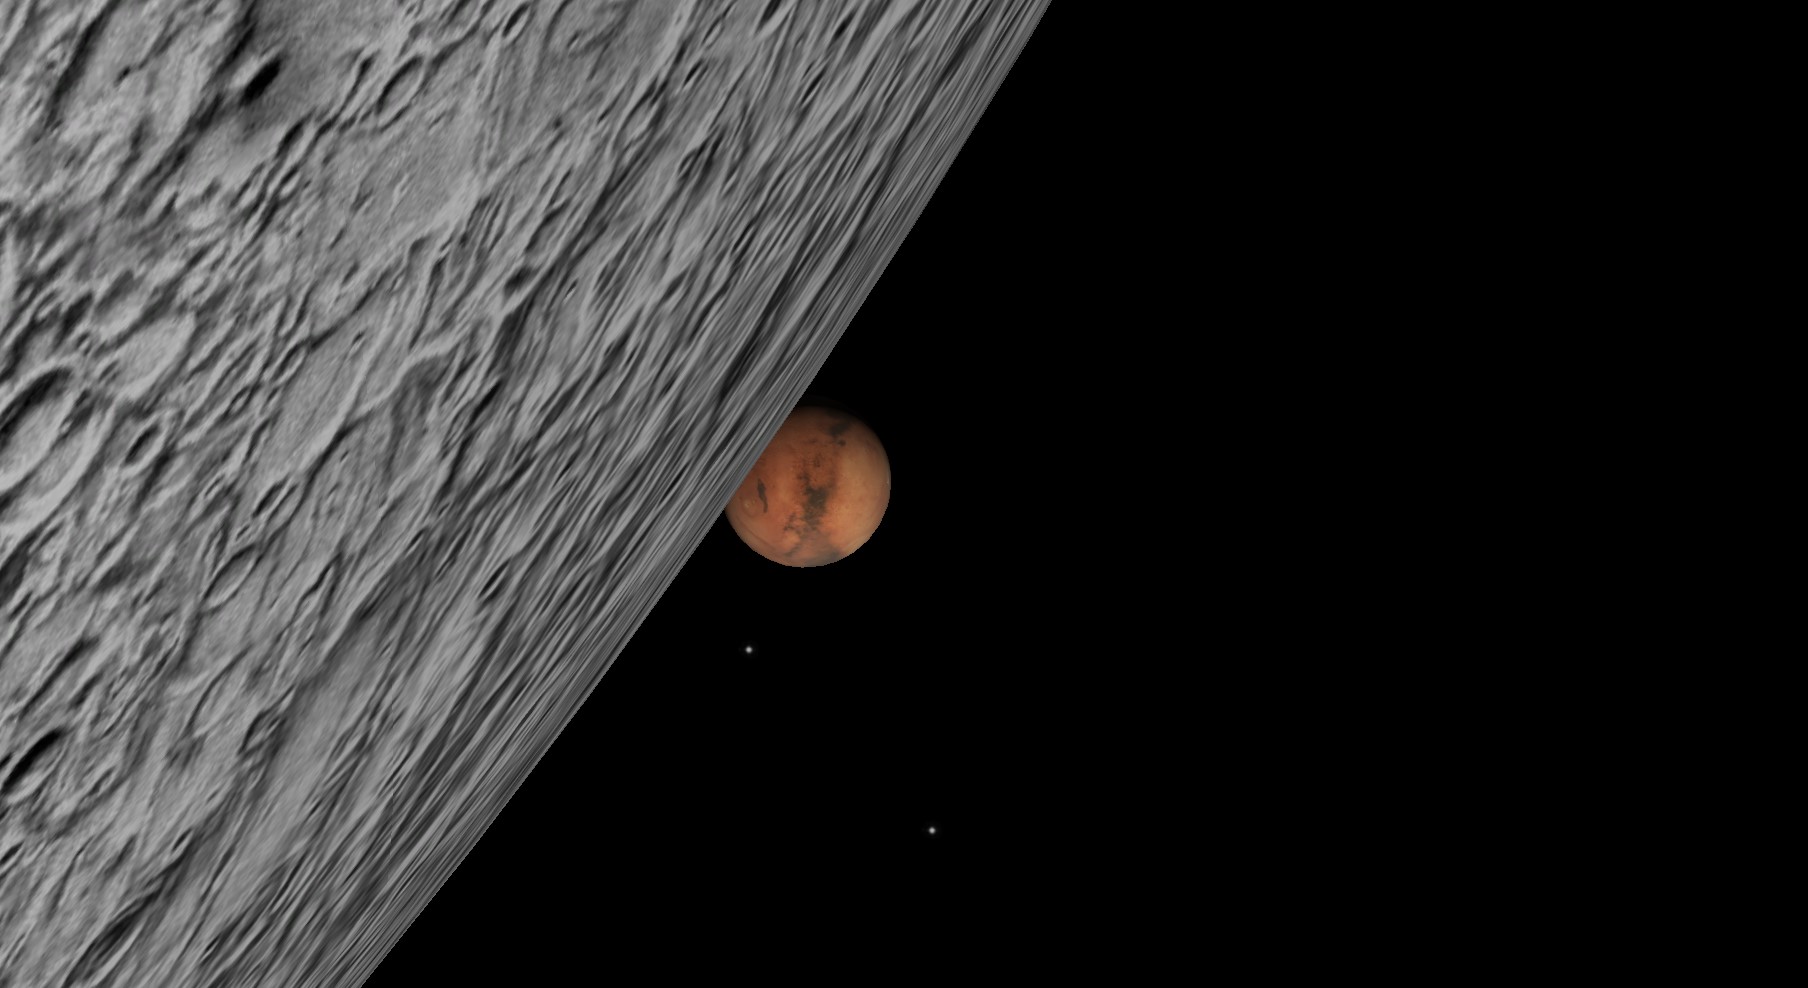 Stare Mars rendezvous with the moon this Labor Day weekend